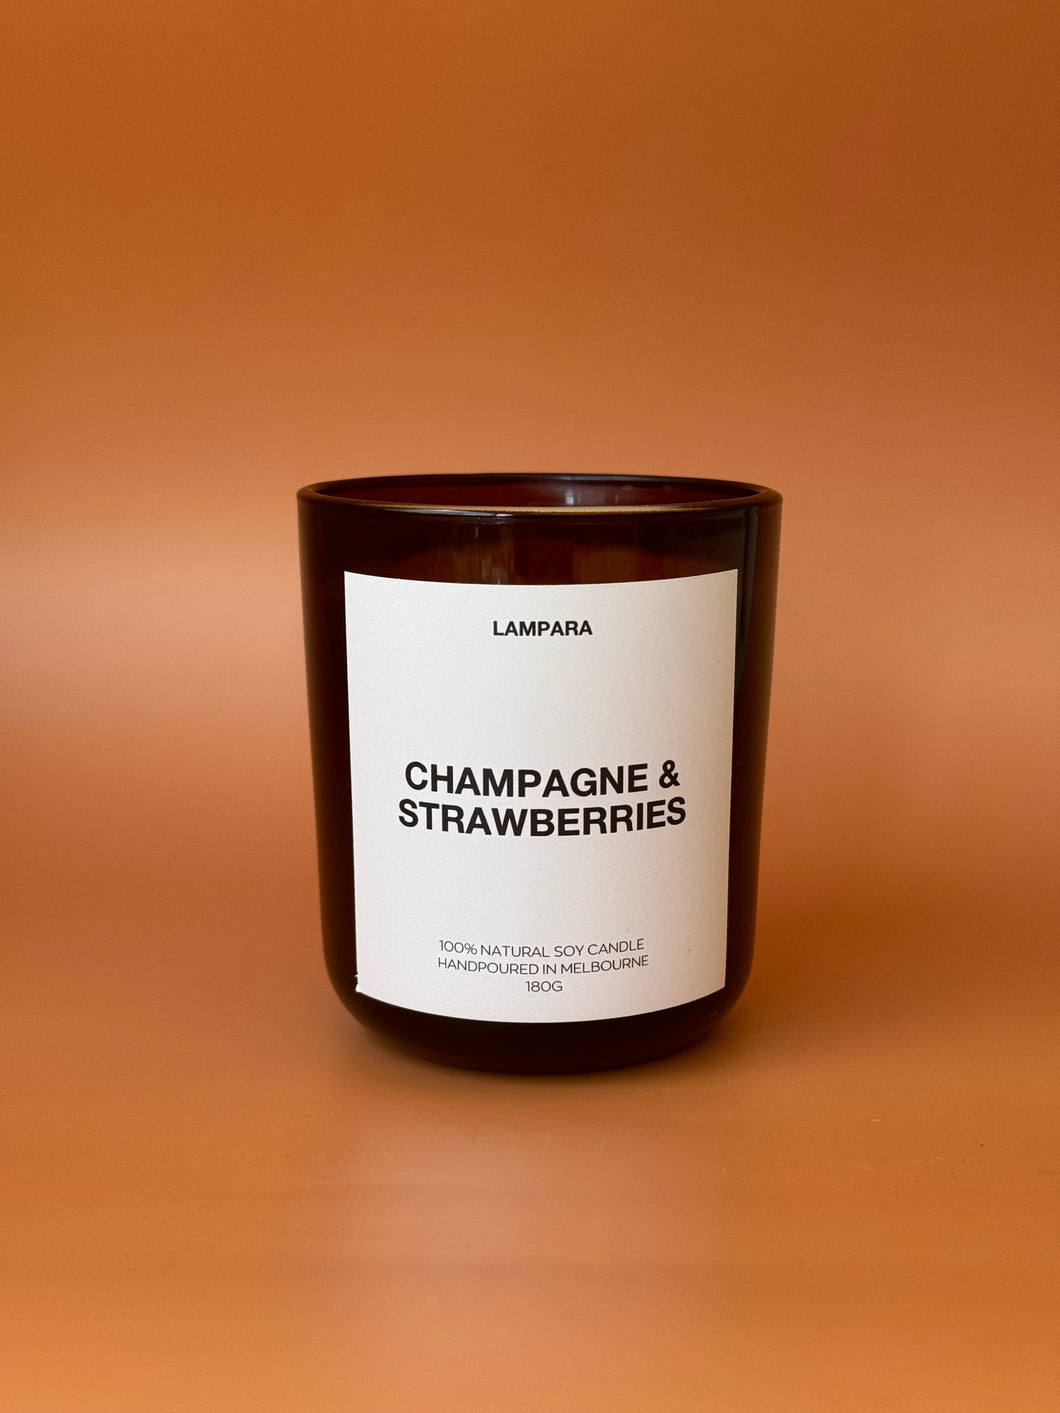 Champagne & Strawberries Soy Candles